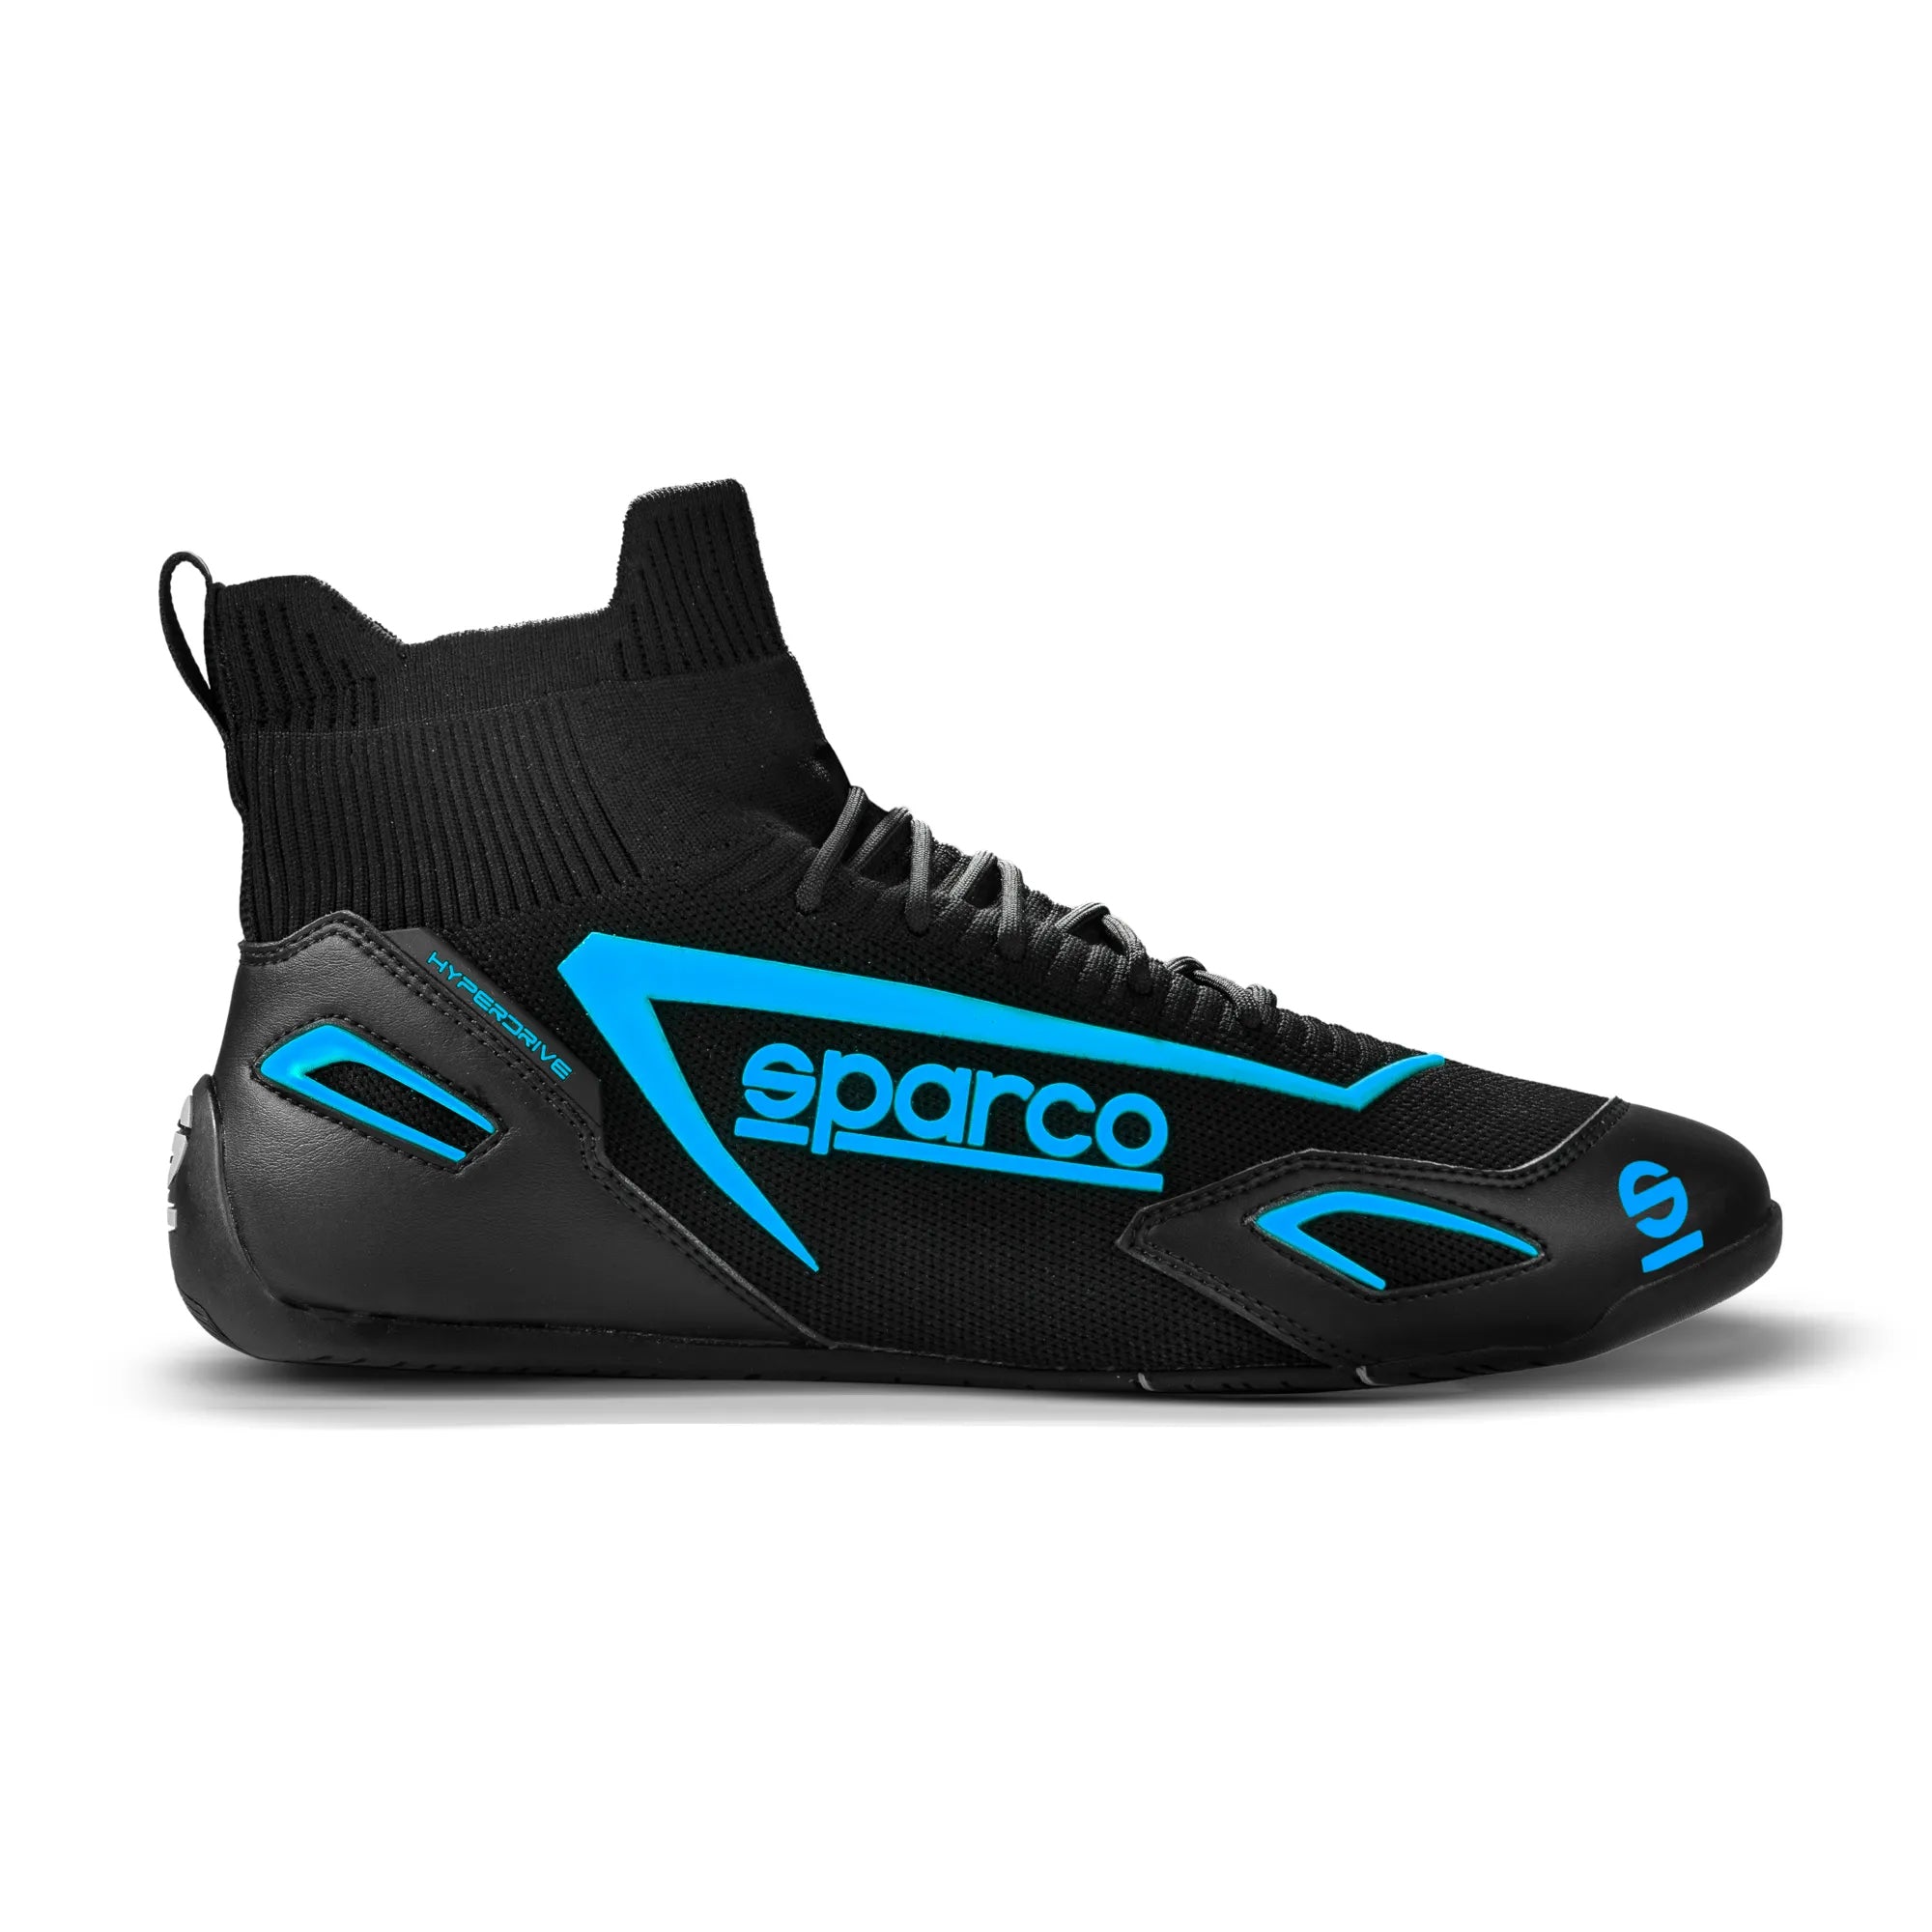 SPARCO 00129342NRAZ Gaming sim racing shoes HYPERDRIVE, black/blue, size 42 Photo-0 